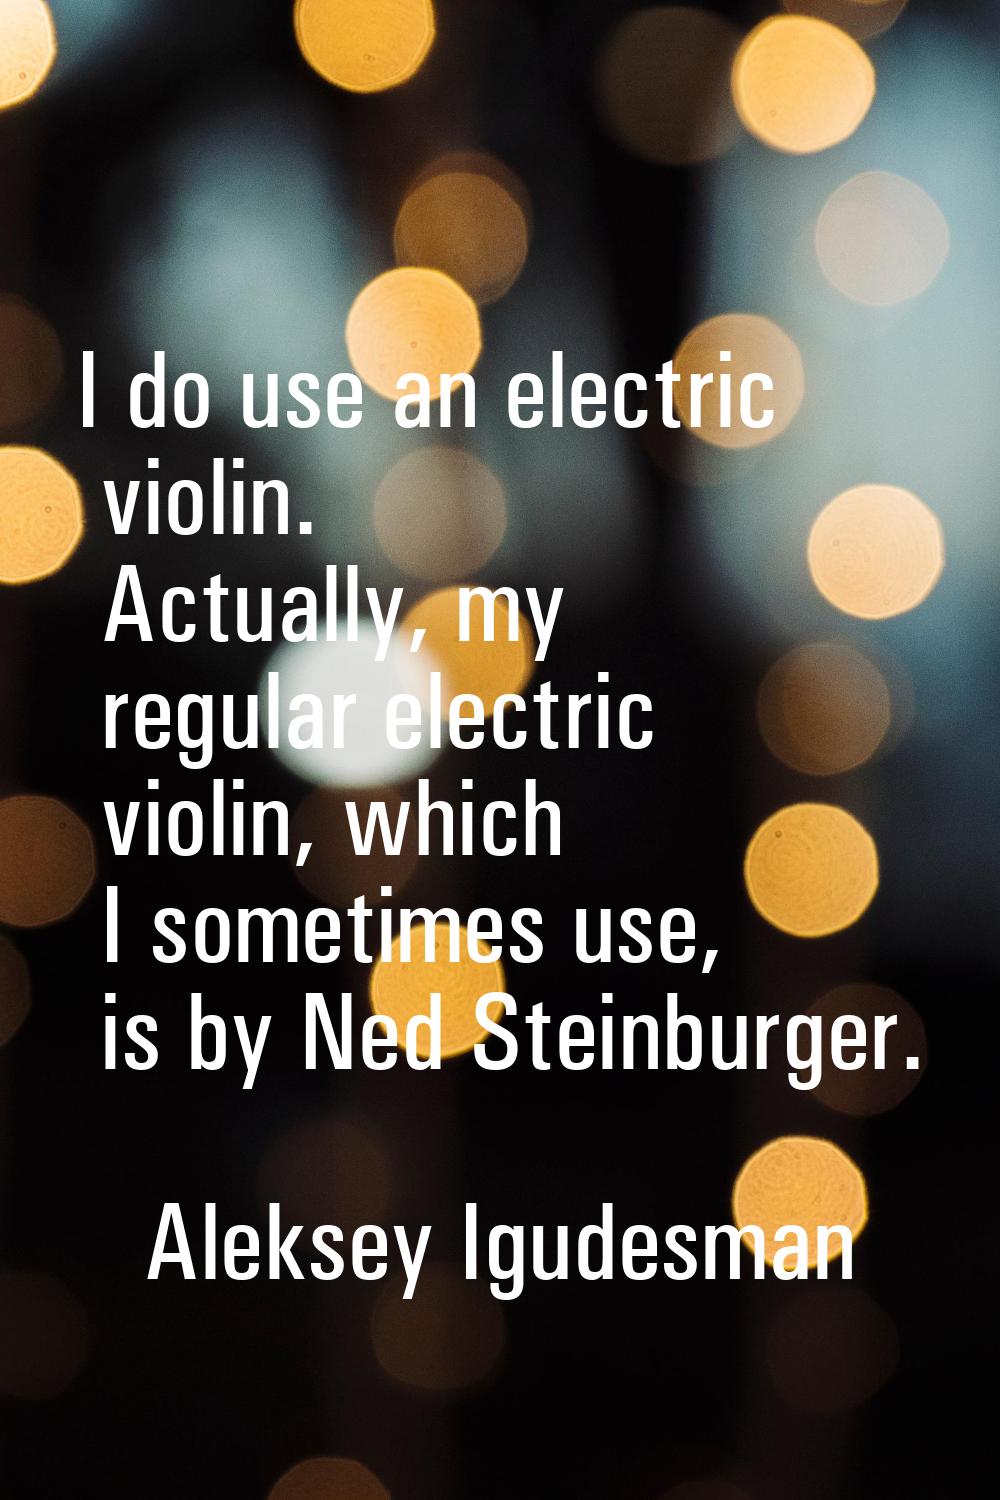 I do use an electric violin. Actually, my regular electric violin, which I sometimes use, is by Ned